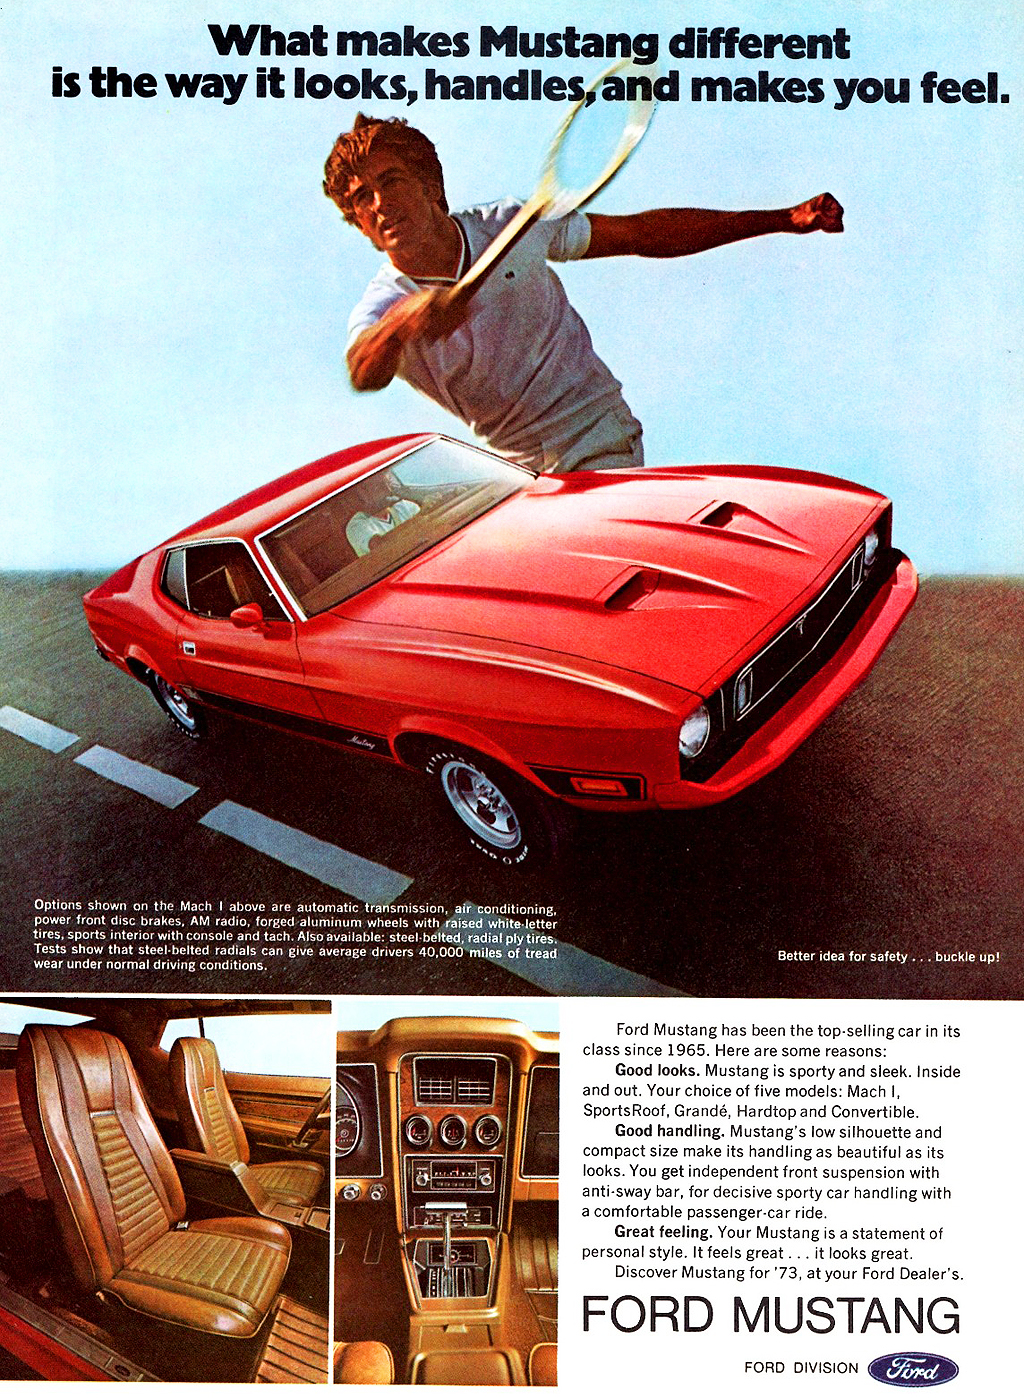 1973 Ford Mustang Mach 1 ad | CLASSIC CARS TODAY ONLINE